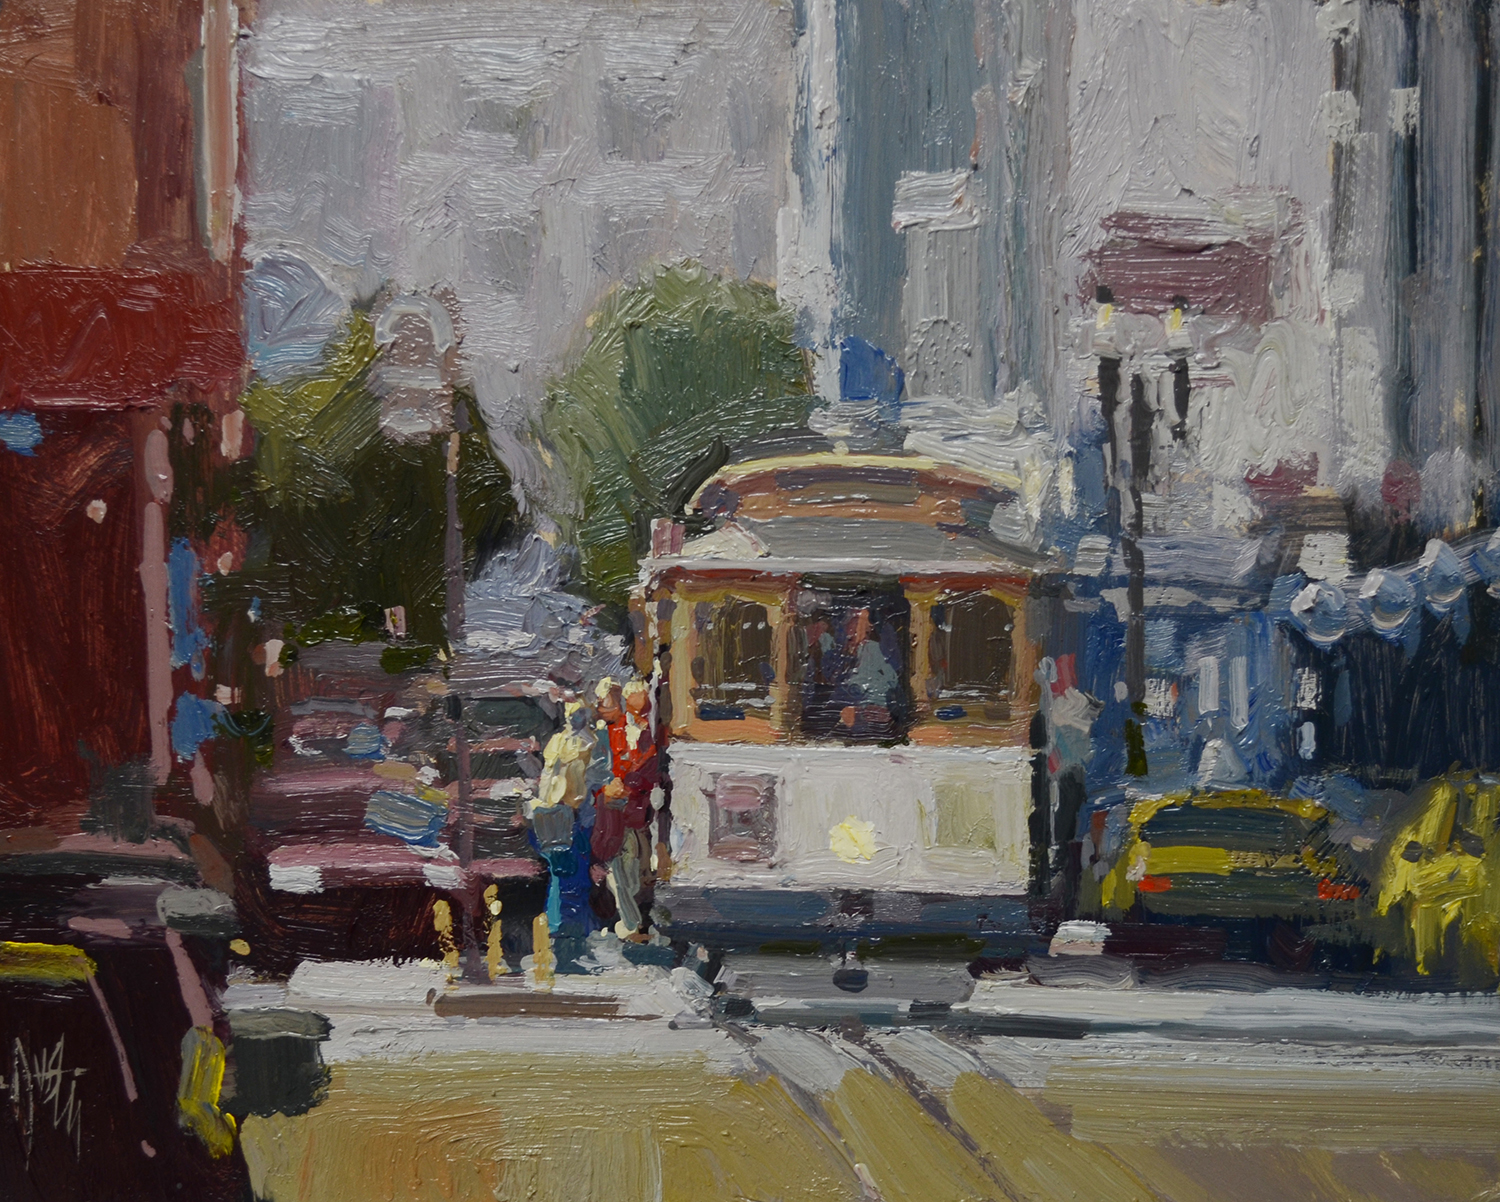 KEN AUSTER - learn how to paint with color and bold brushstrokes in oils. His painterly style is easier to learn than you think! Come join his online self-study art workshop. Click to discover more!